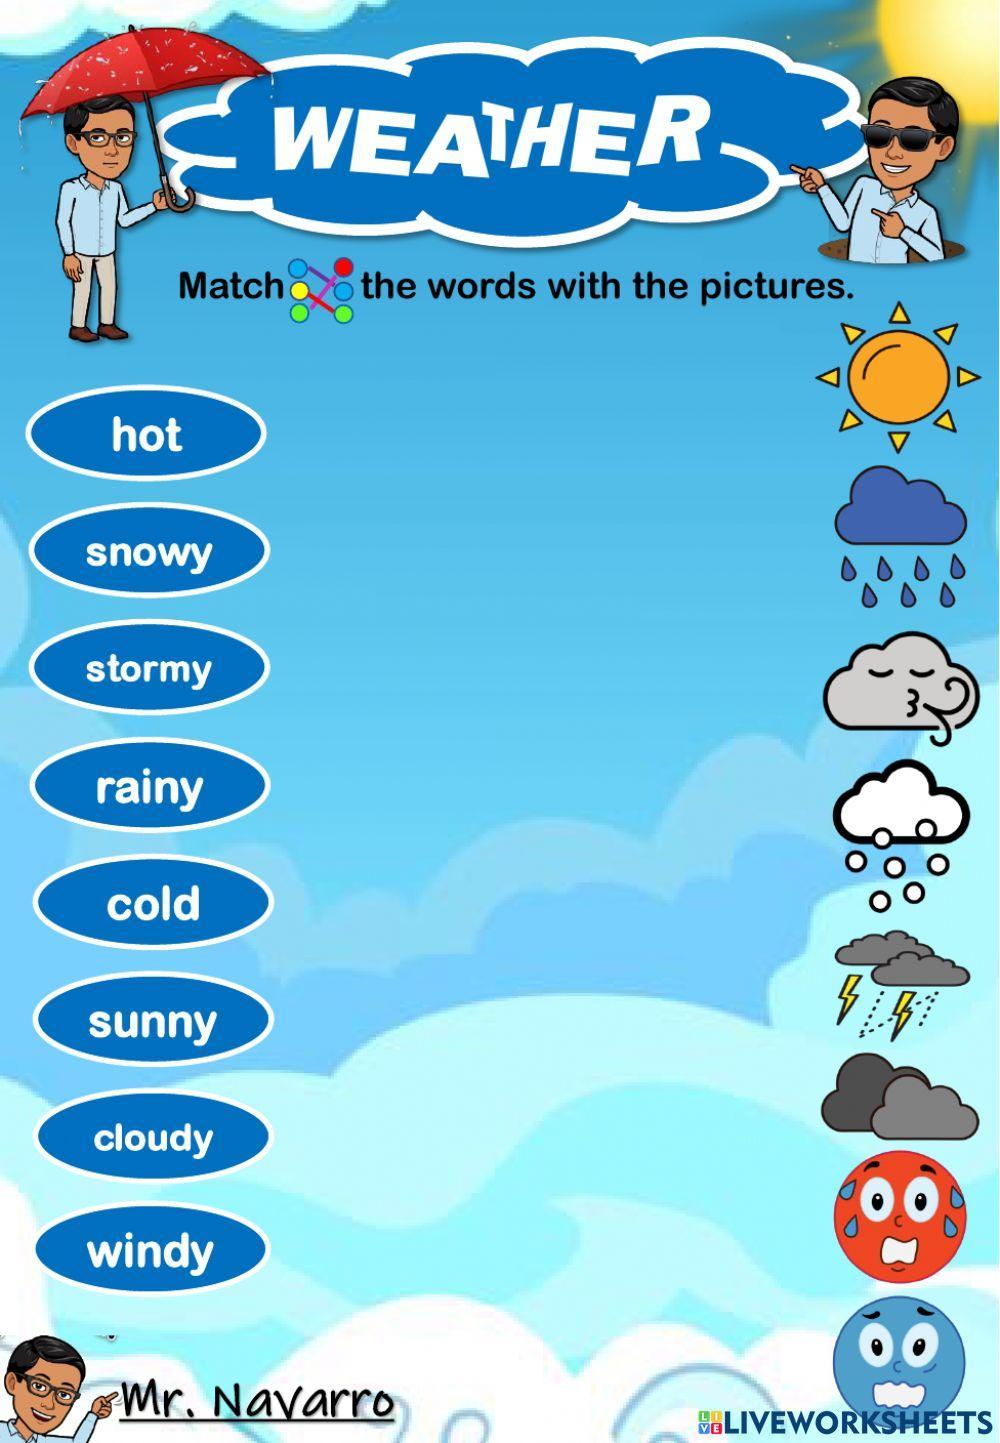 Weather (Match the words with the pictures)